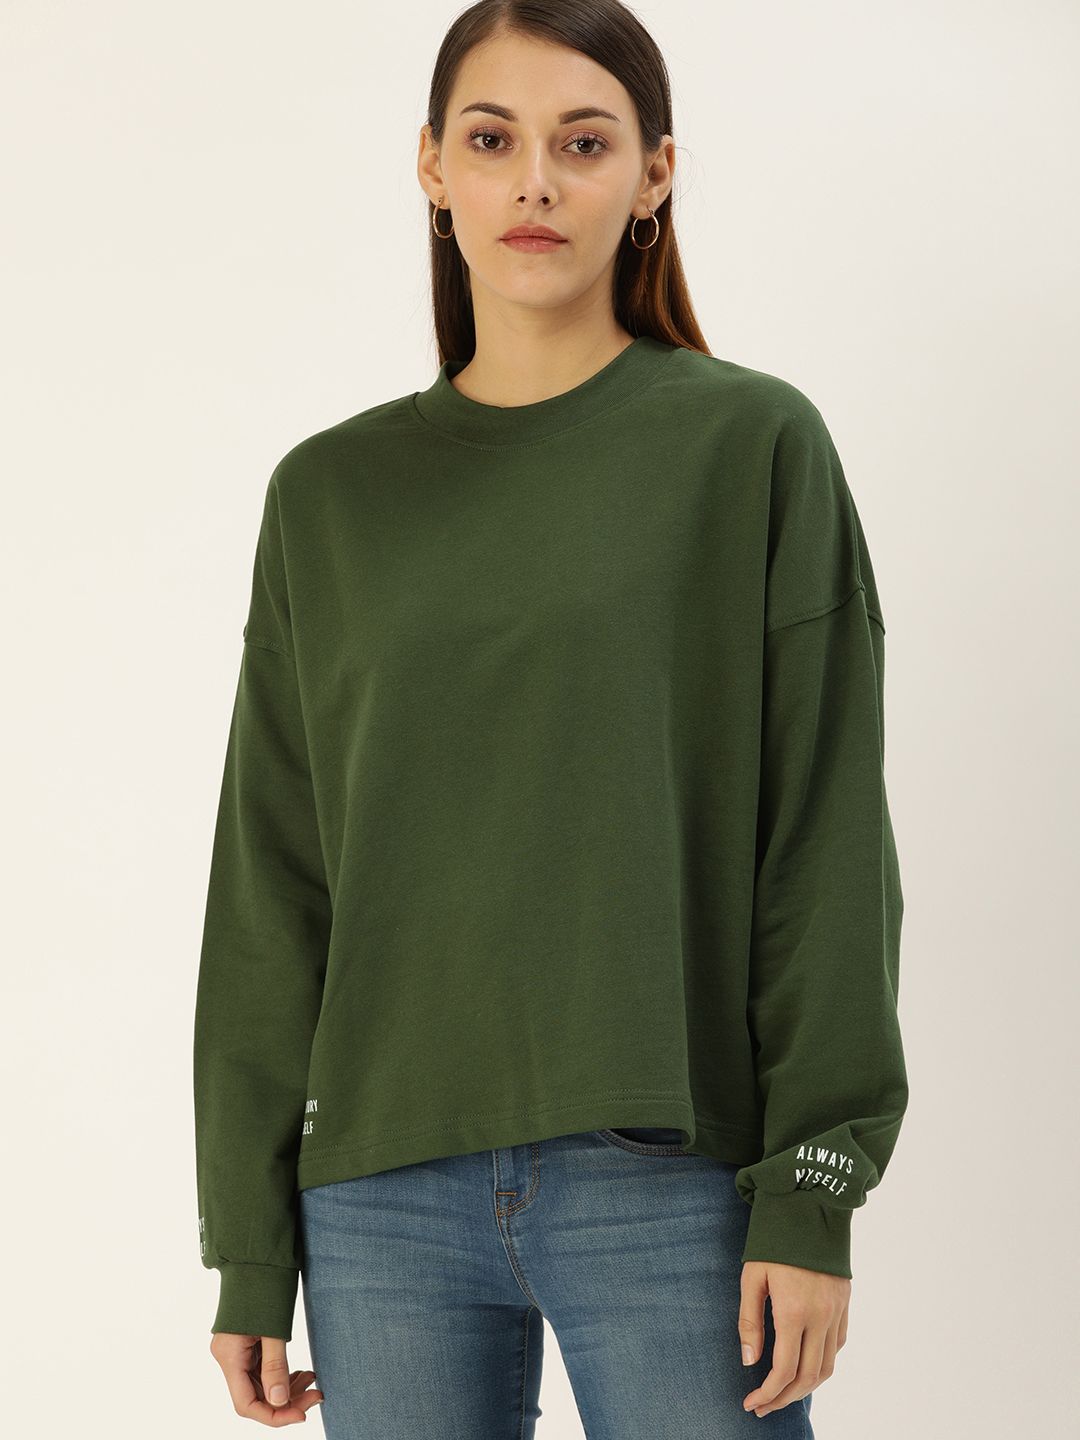 Flying Machine Women Olive Green Solid Sweatshirt with Print Detail Price in India